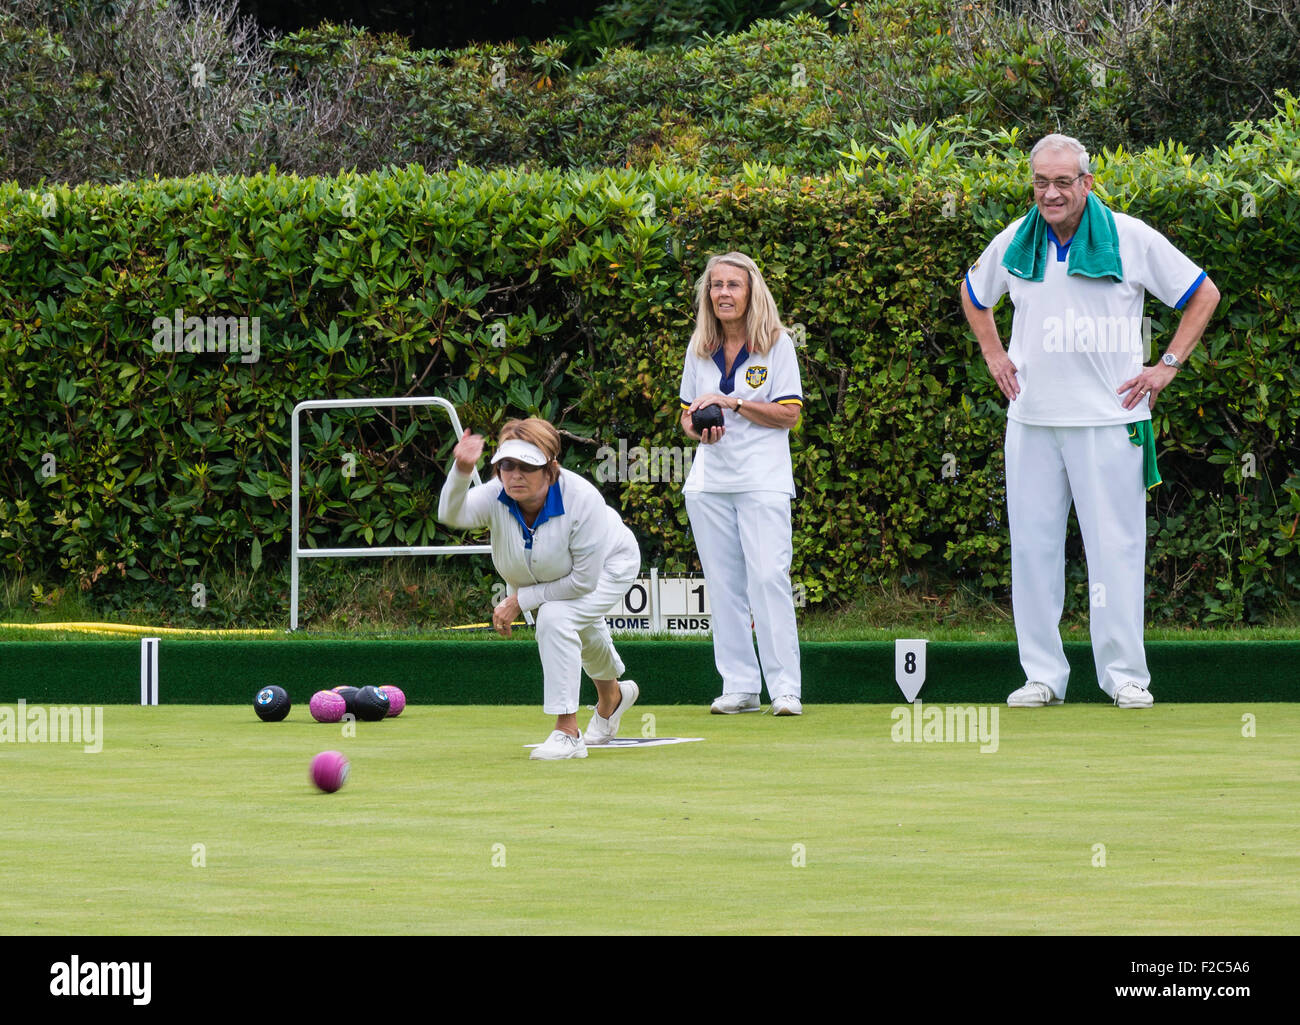 People playing Bowls at the Argyll Bowling Club, Westbourne, Bournemouth, Dorset, England, UK Stock Photo